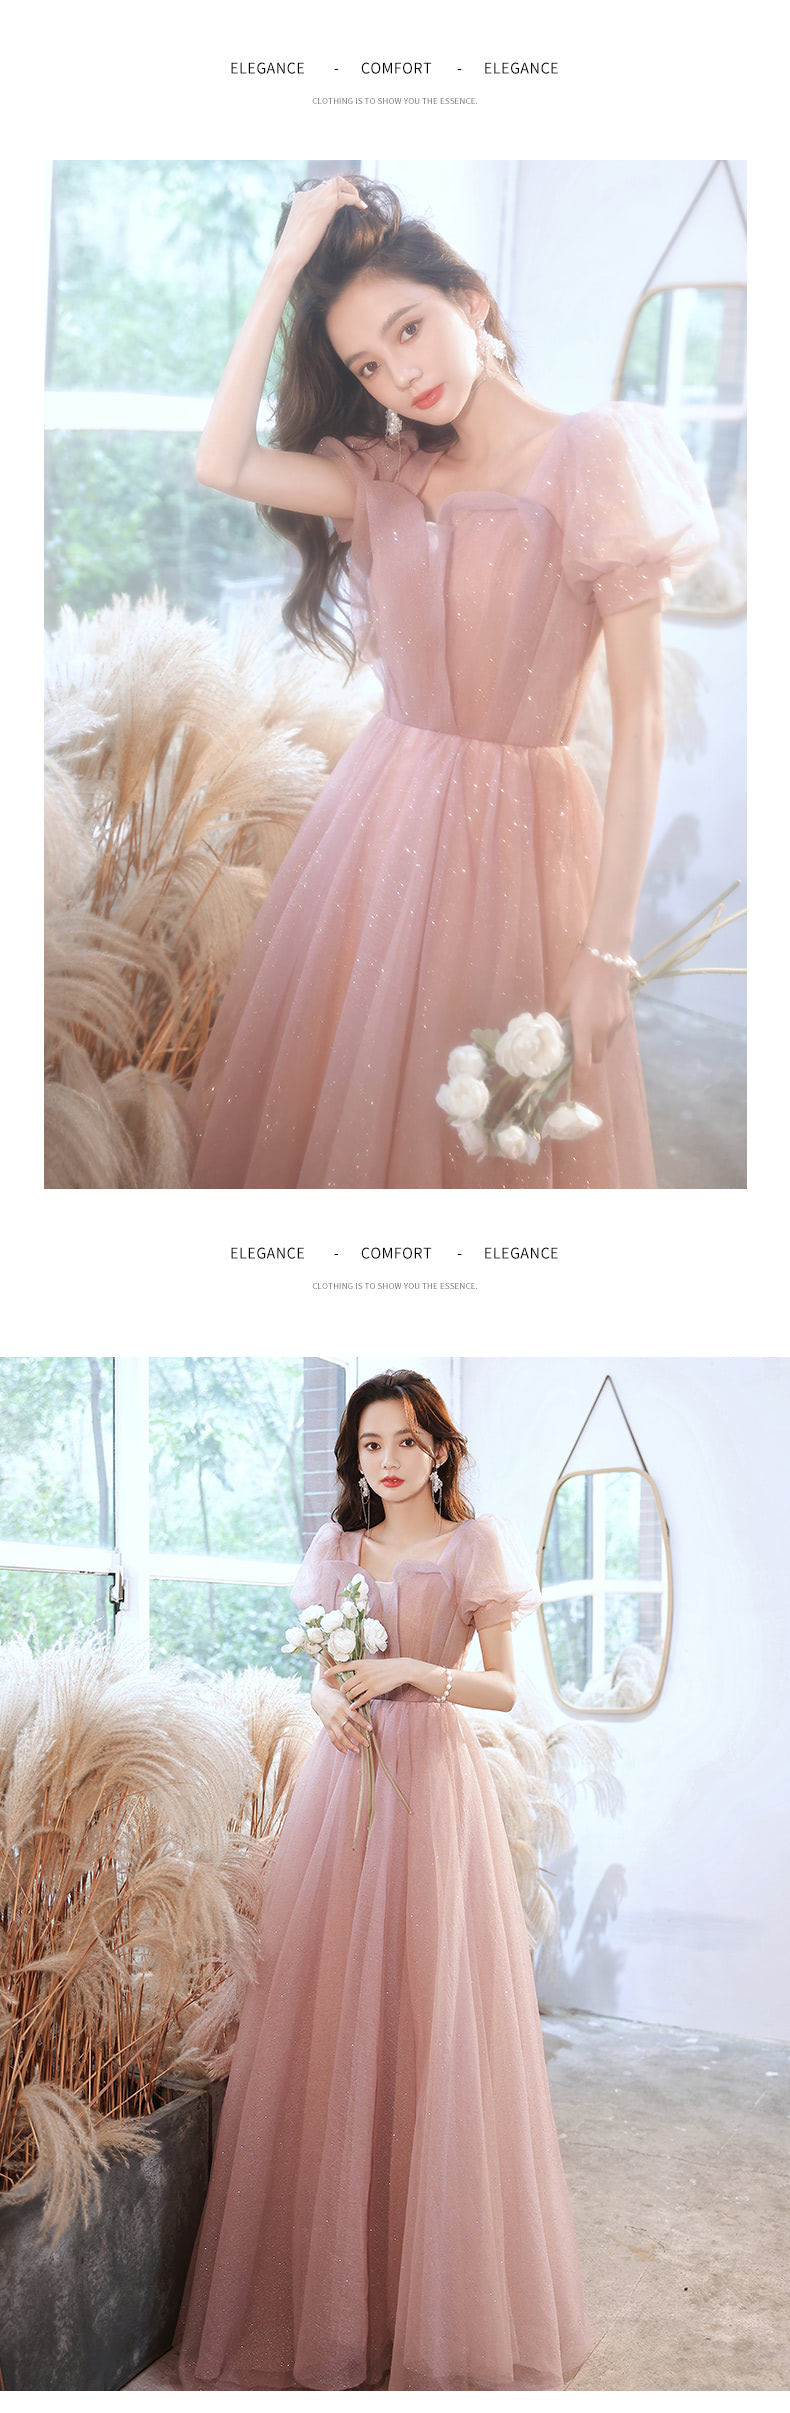 Romantic-Pink-Tulle-Short-Sleeve-Party-Ball-Gown-Formal-Long-Dress13.jpg